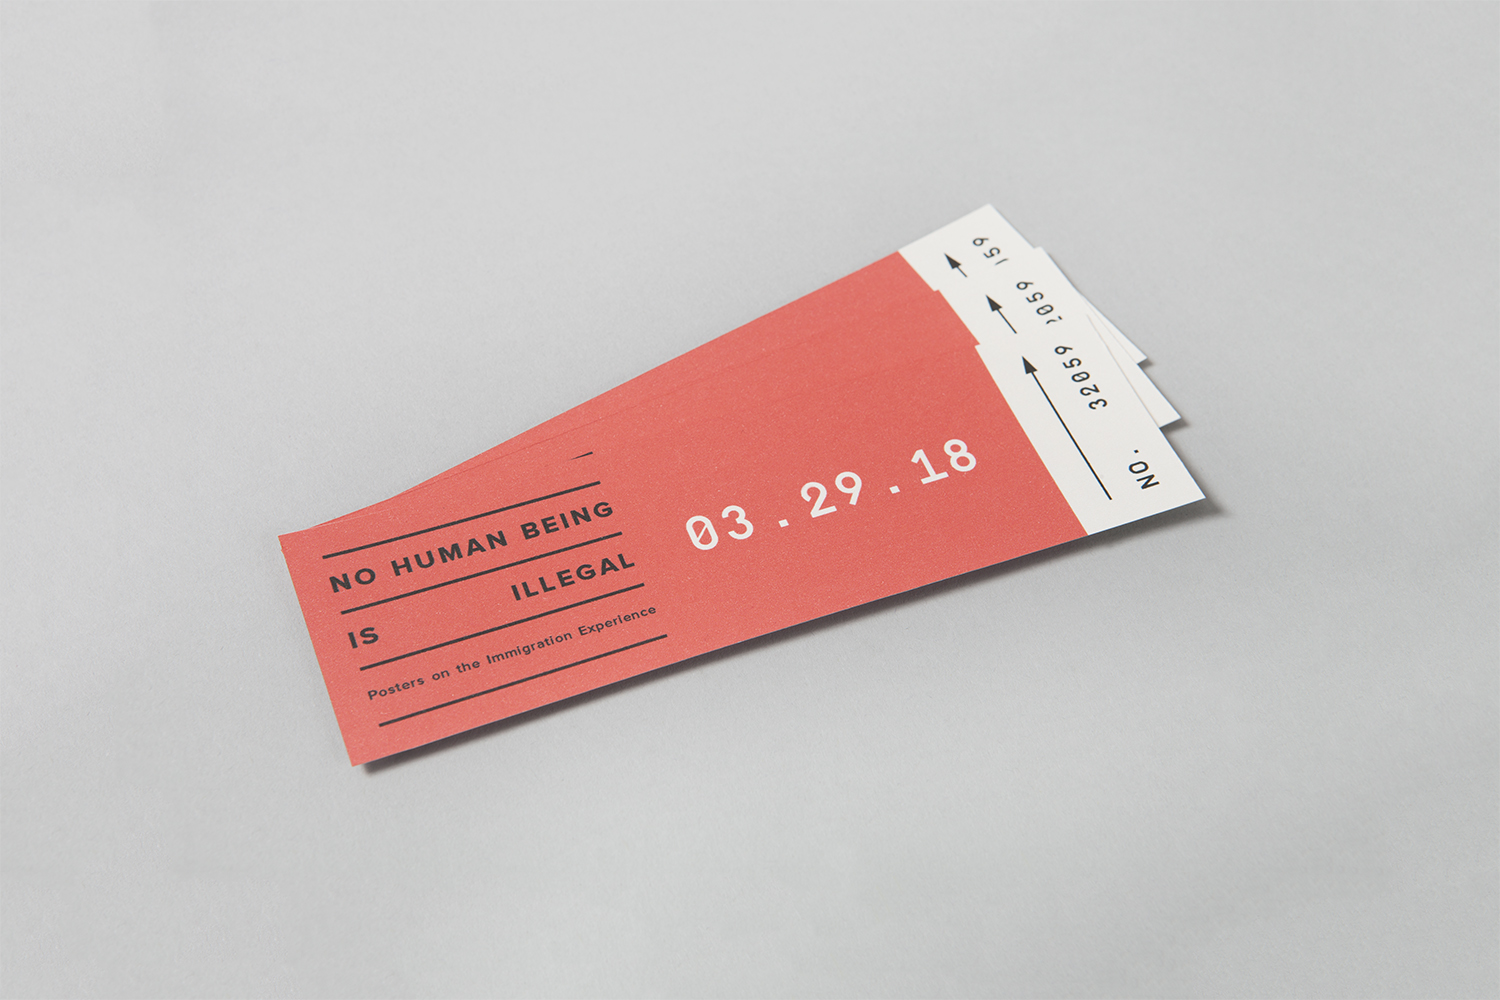 Visual identity and ticket design by Canadian studio Blok for The Center for the Study of Political Graphics